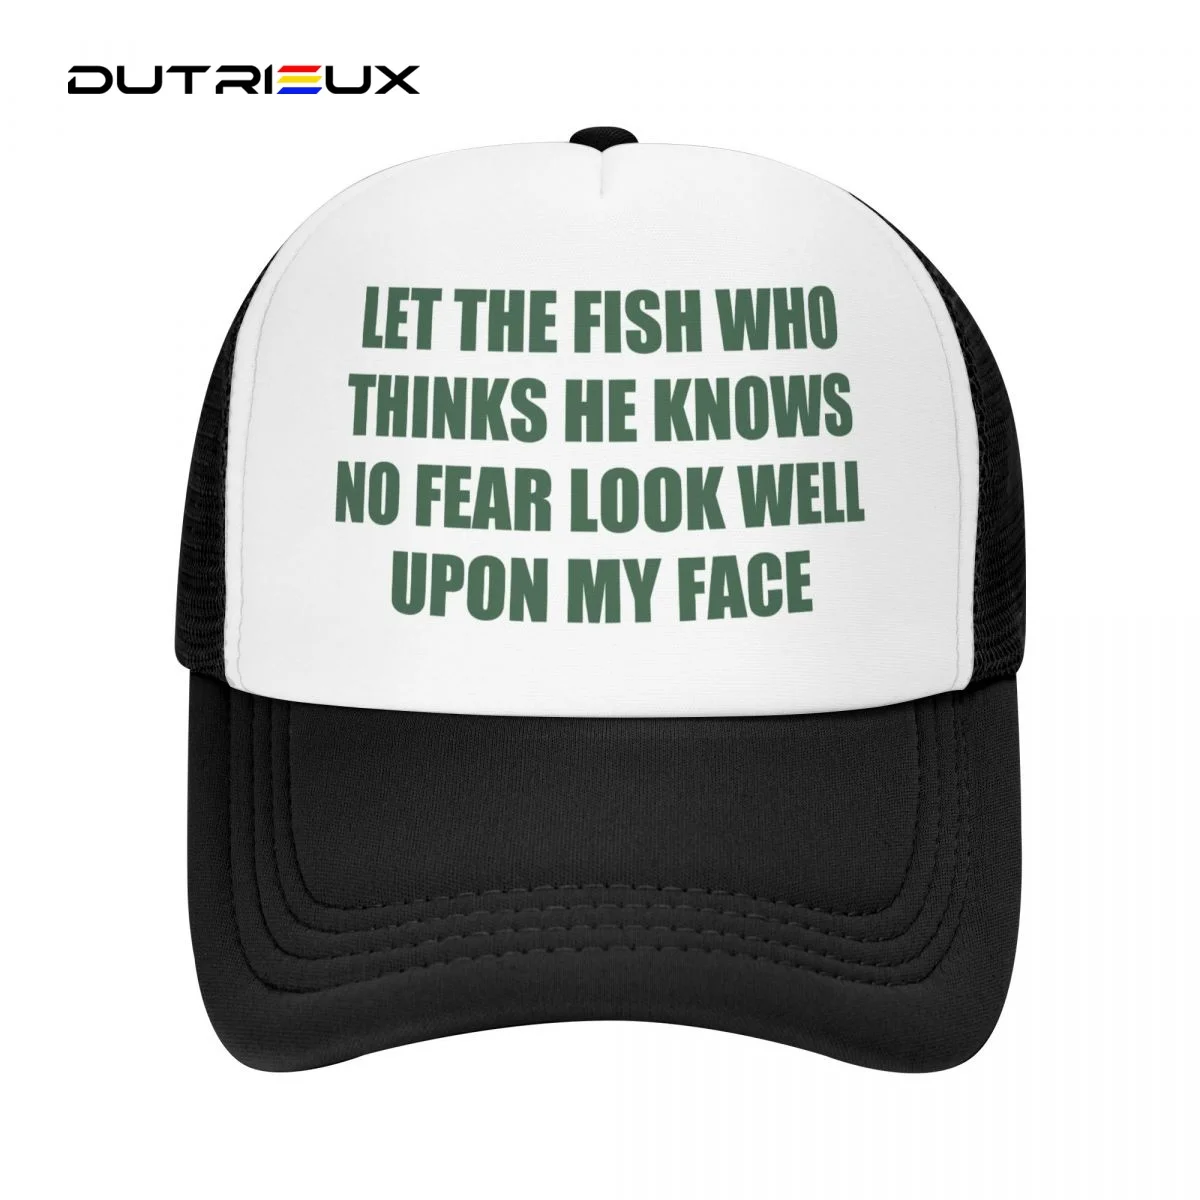 

Let The Fish Who Thinks He Knows No Fear Look Well Upon My Face Outdoor Sport Cap Baseball Cap Adjustable Cap Fashion Summer Hat